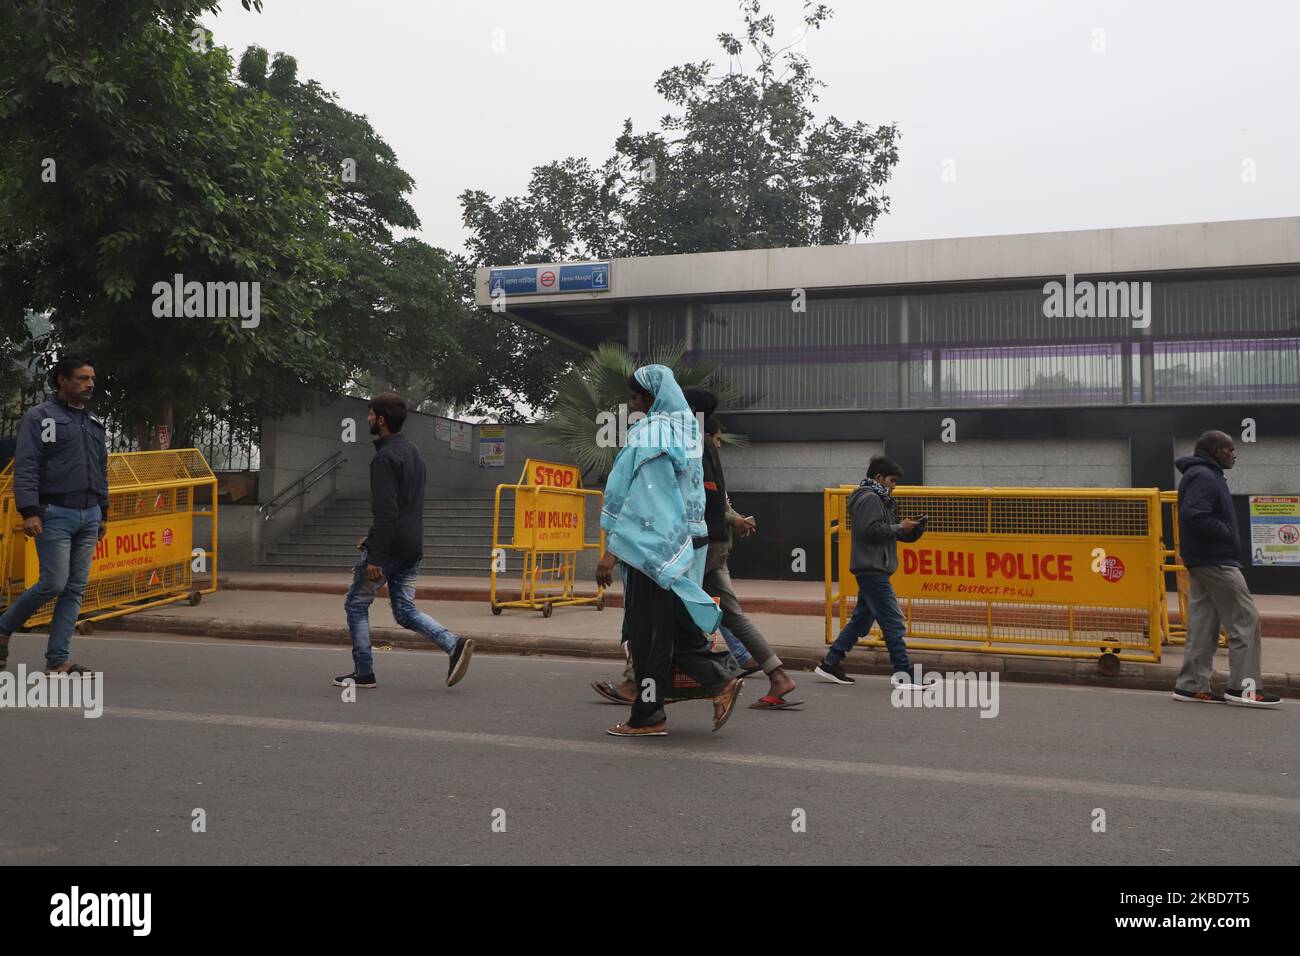 People walk near q closed metro station in New Delhi India following the protests on 19 December 2019. People march in Indian capital New Delhi Thursday in protest against the controversial citizenship bill that allegedly discriminates against minority Muslim community. Protest rallies were held across several major cities in the country even as government enforced ban on assembly of people in several cities. The protests have spiked since Sunday following the crackdown and violent police action on students in Jamia Milia Islamia university in New Delhi (Photo by Nasir Kachroo/NurPhoto) Stock Photo